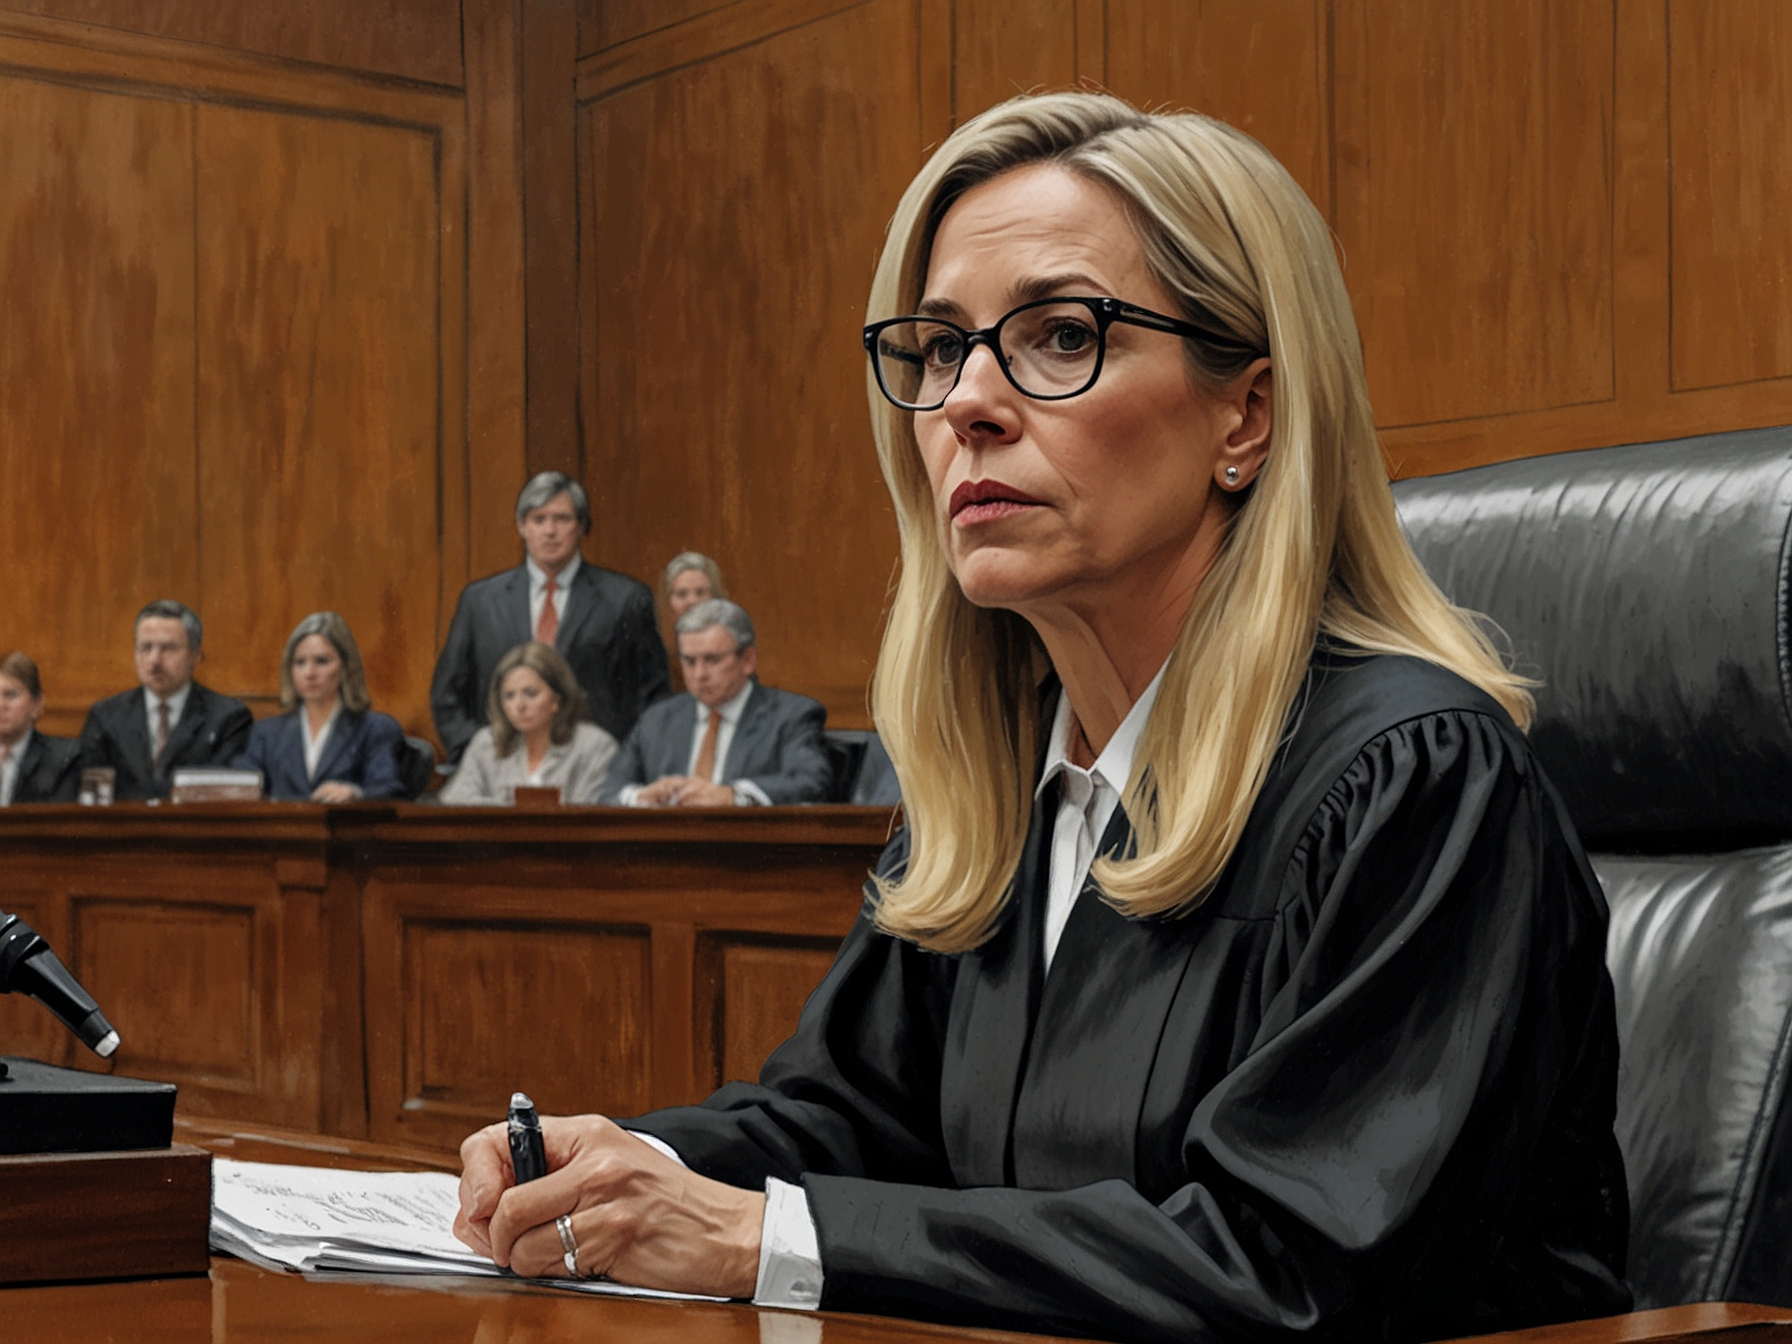 Federal Judge Aileen Cannon listens to arguments in a courtroom, considering the appointment of Jack Smith as special counsel amidst ongoing legal challenges involving former President Trump.